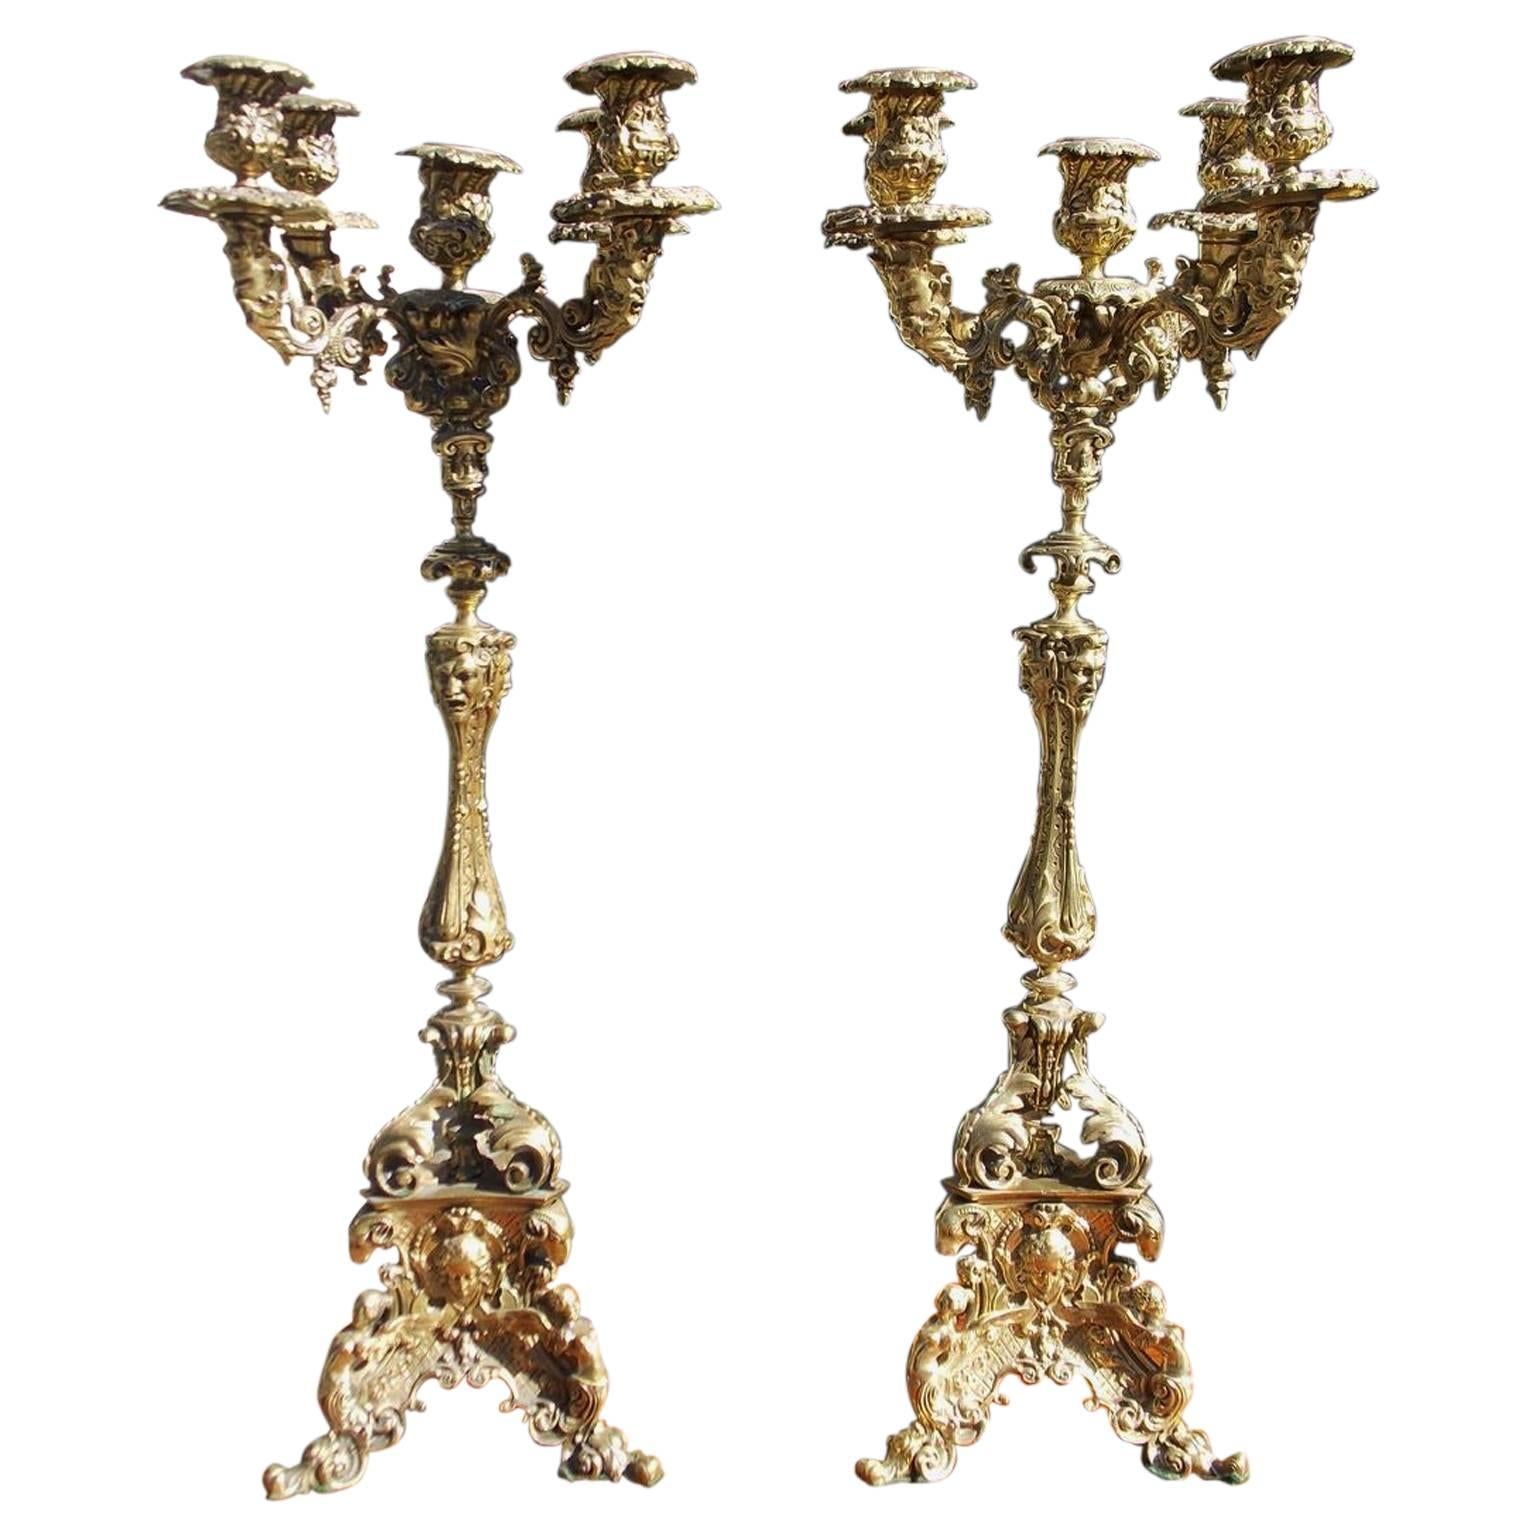 Pair of Italian Bronze Figural and Floral Candelabras, Circa 1830